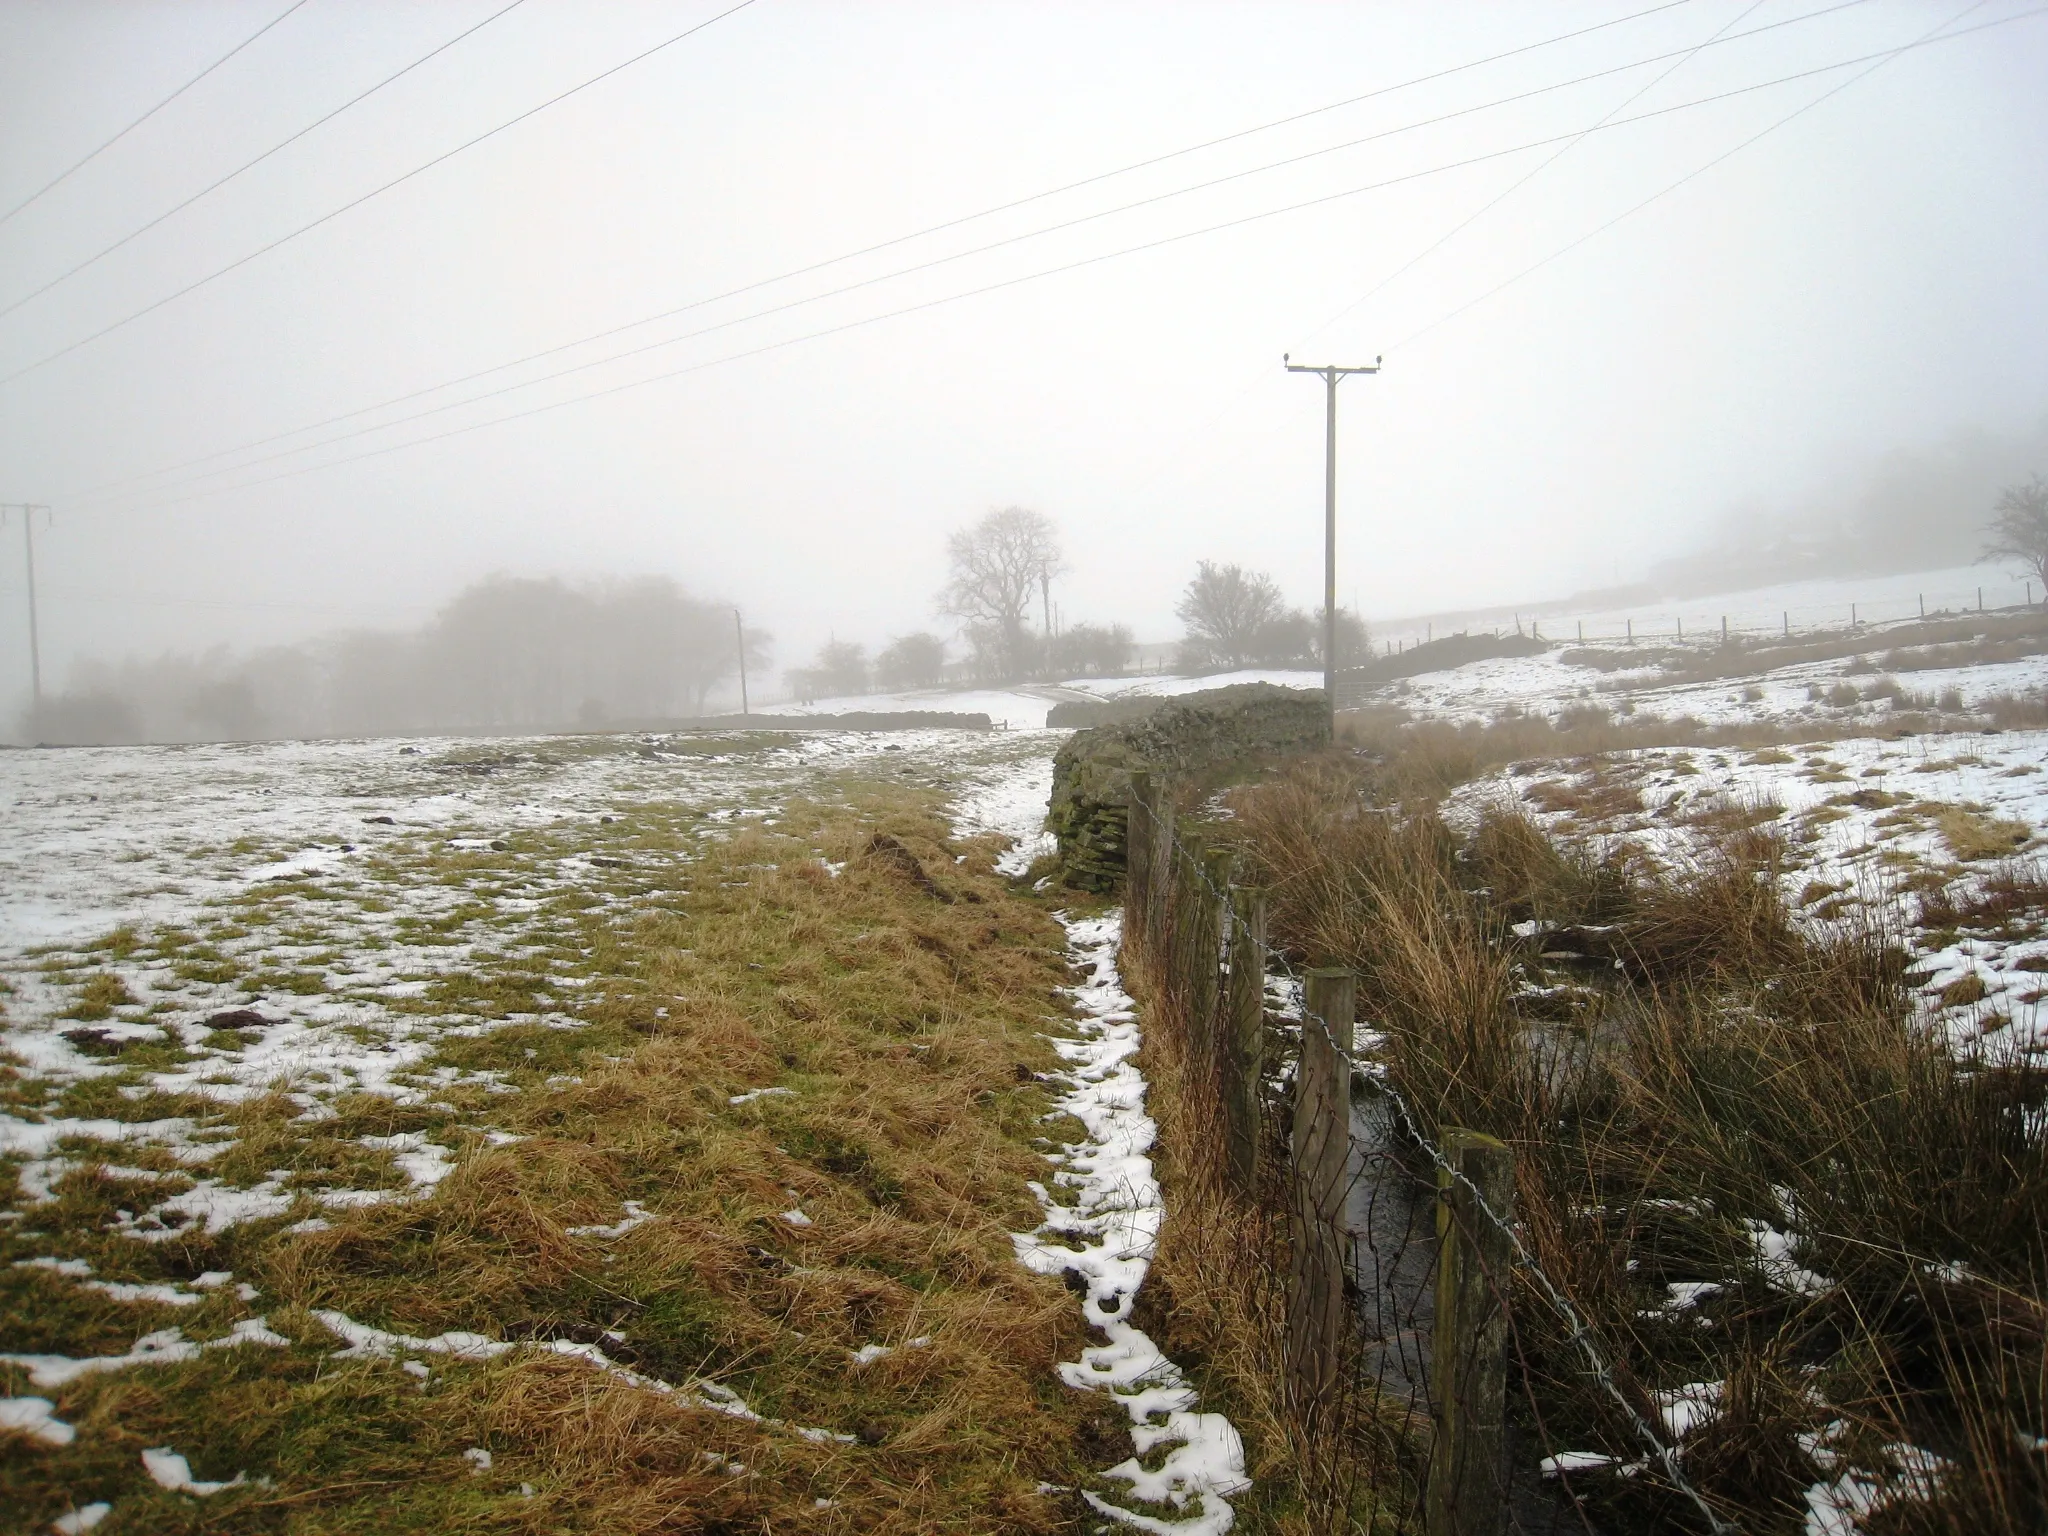 Photo showing: Boundary wall/fence and power lines This photograph shows a view of the boundary wall and power lines near the public footpath that links West Biggins and East Biggins. The picture was taken under misty conditions in late February looking in an east-north-easterly direction towards Sunniside Farm.